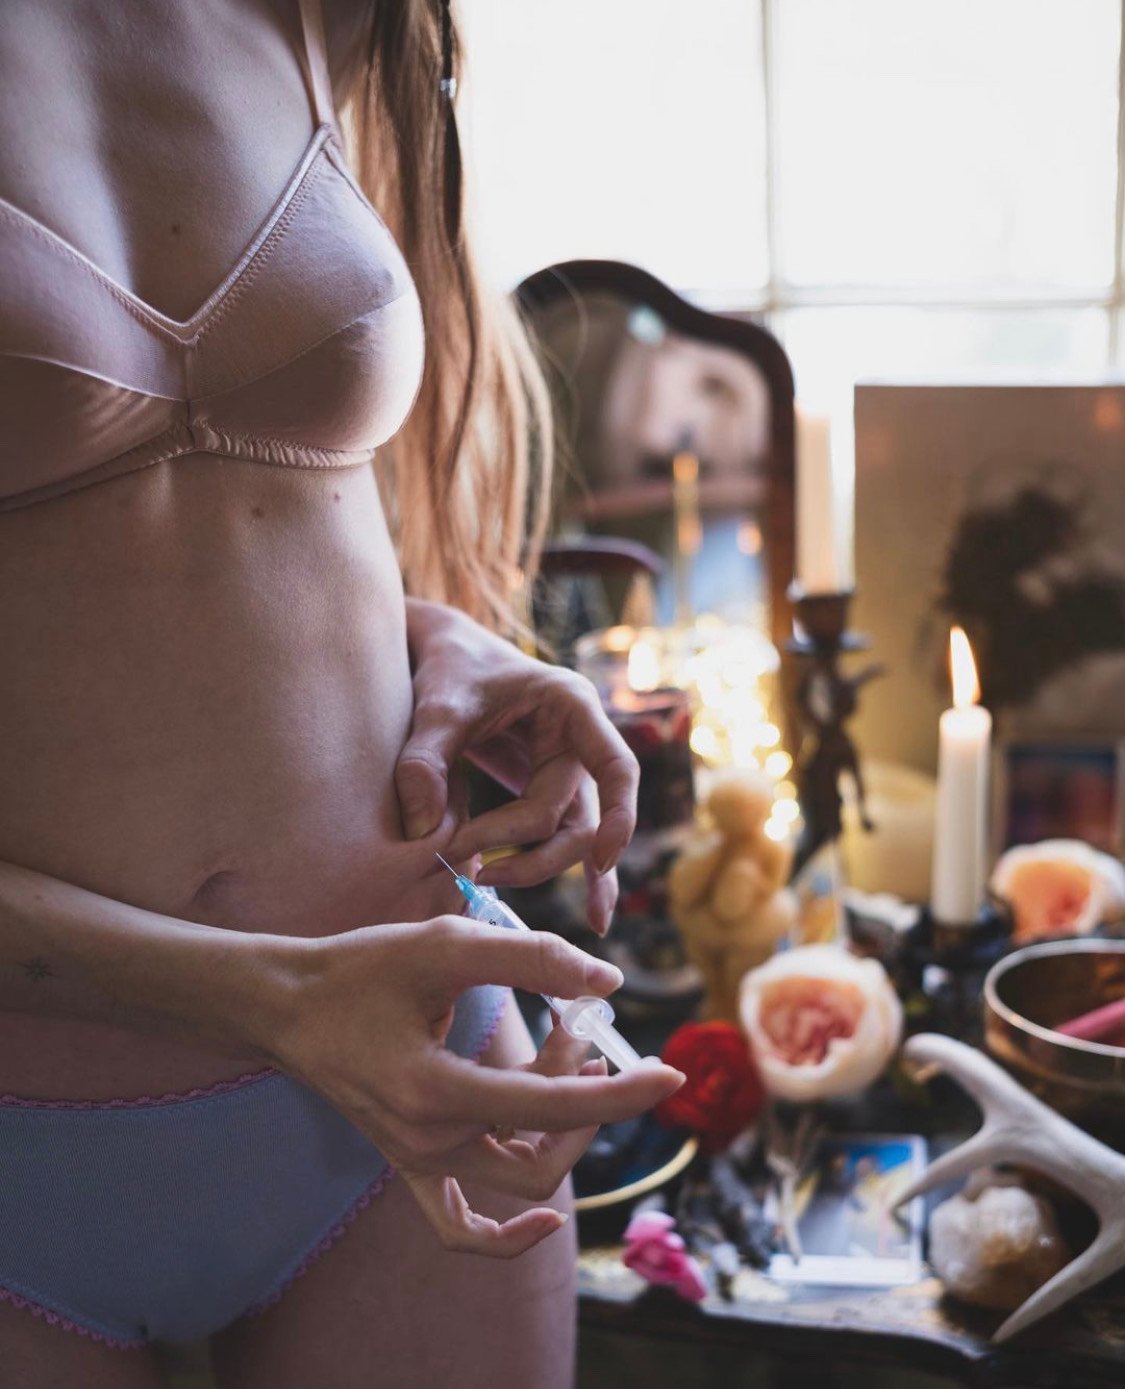 Artists Grapple With the Meaning of Motherhood in a New York